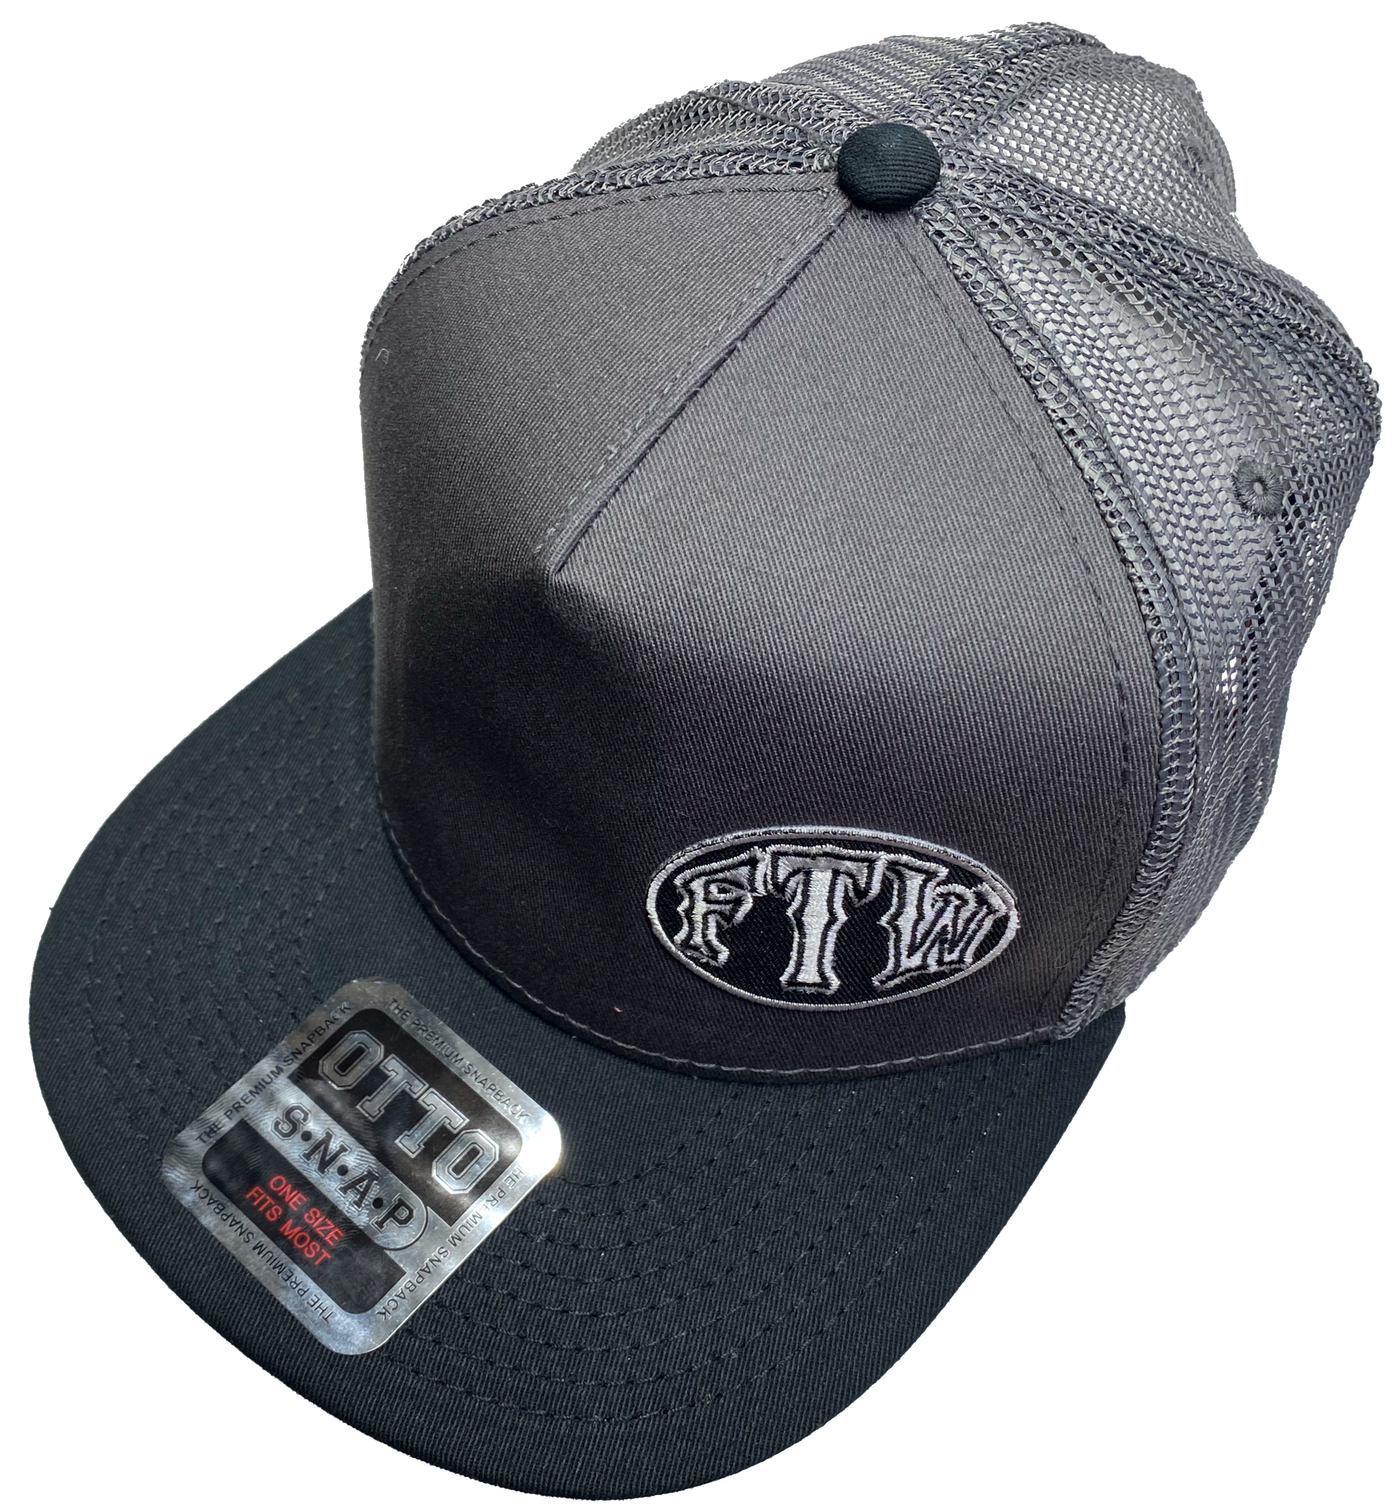 Gray Flat Bill Cap with Gray mesh back. Front has a Silver embroidered patch that says FTW. FTW design also under the bill. Structured top to keep its shape. Sold at our shop just outside Nashville in Smyrna, TN.